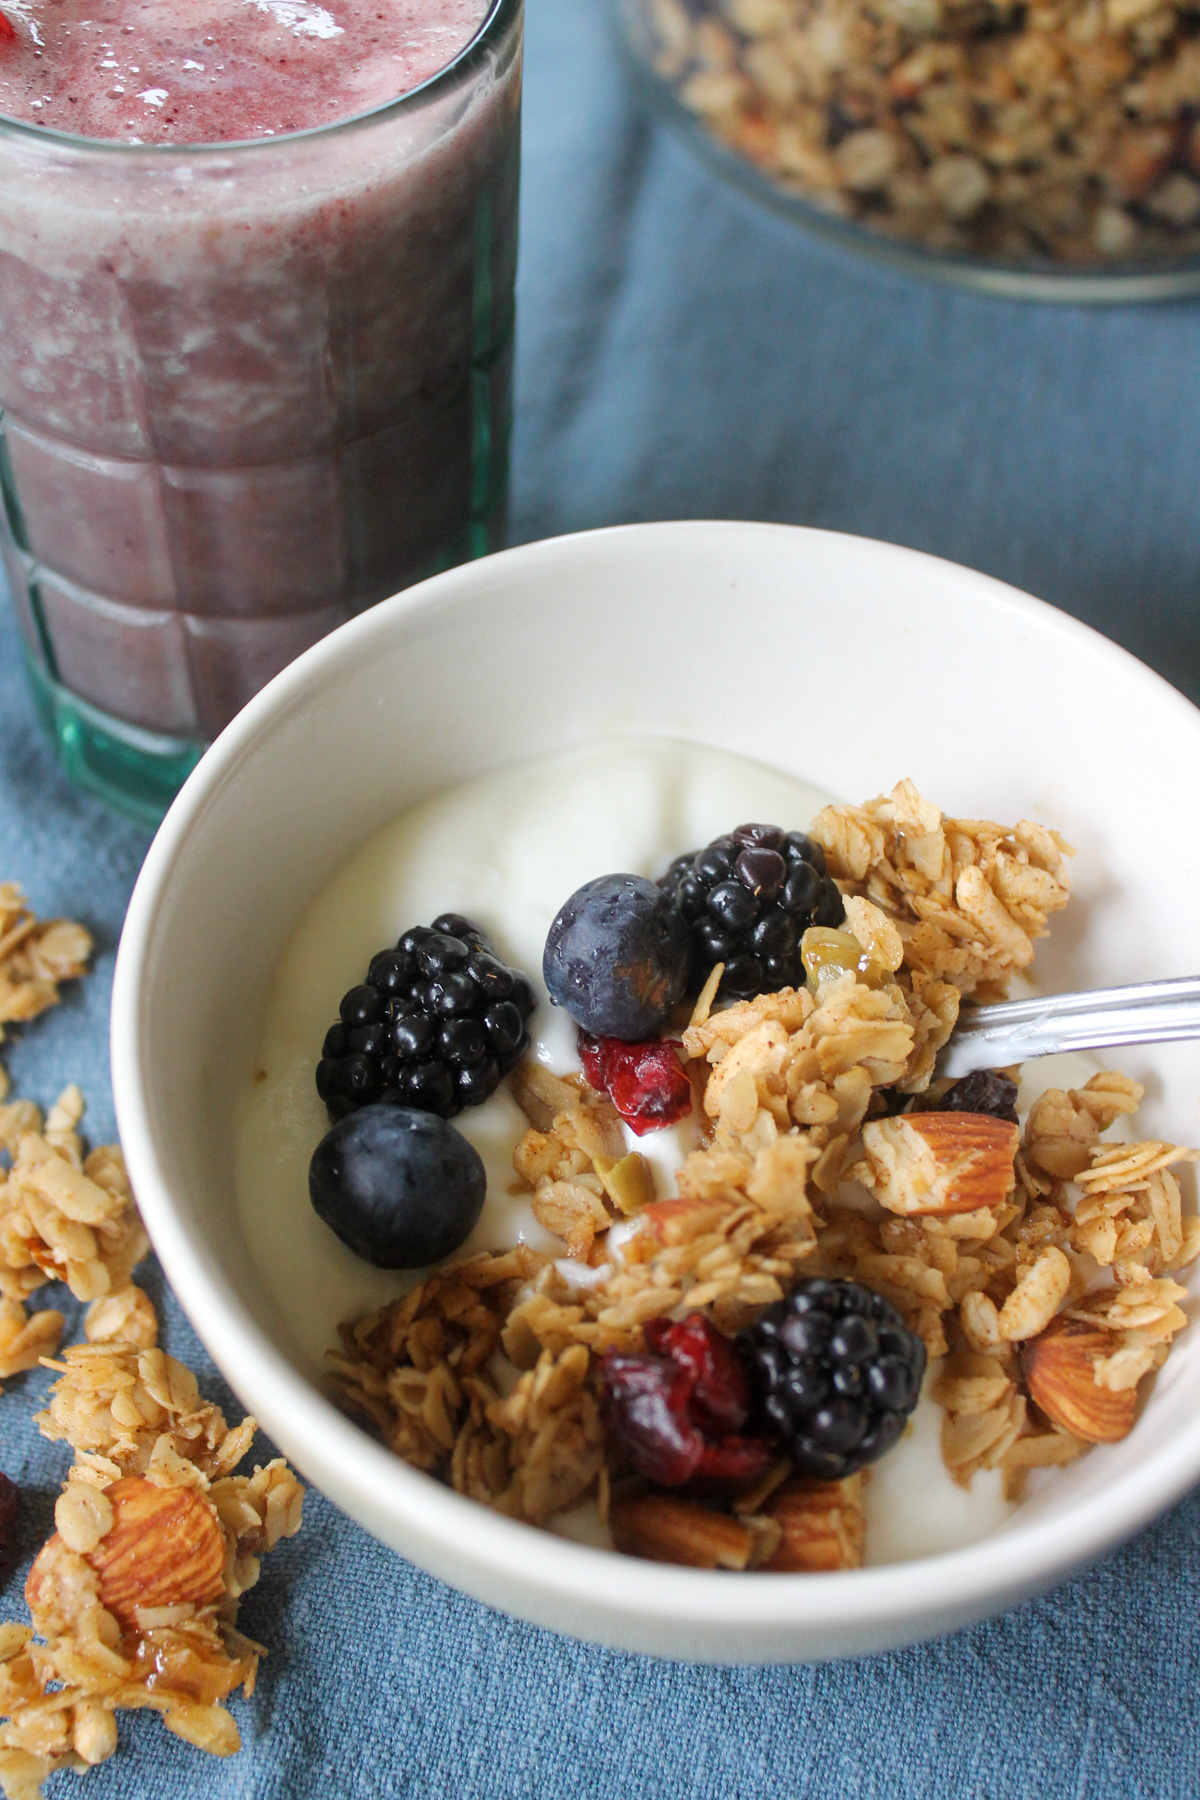 A kid's small bowl of yogurt with homemade granola and berries next to a smoothie.